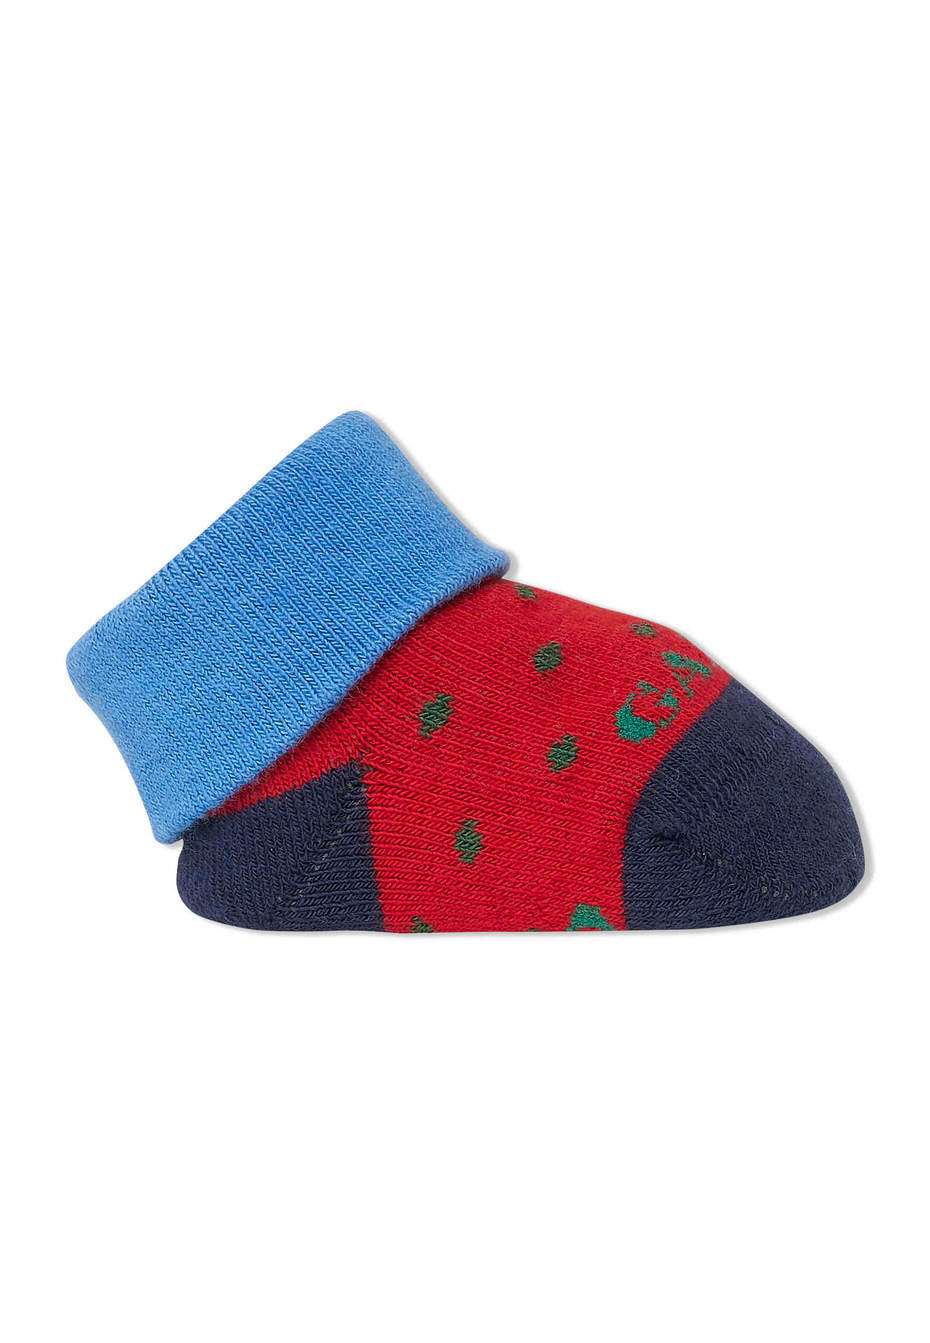 Kids' red cotton booties with polka dots - Gallo 1927 - Official Online Shop